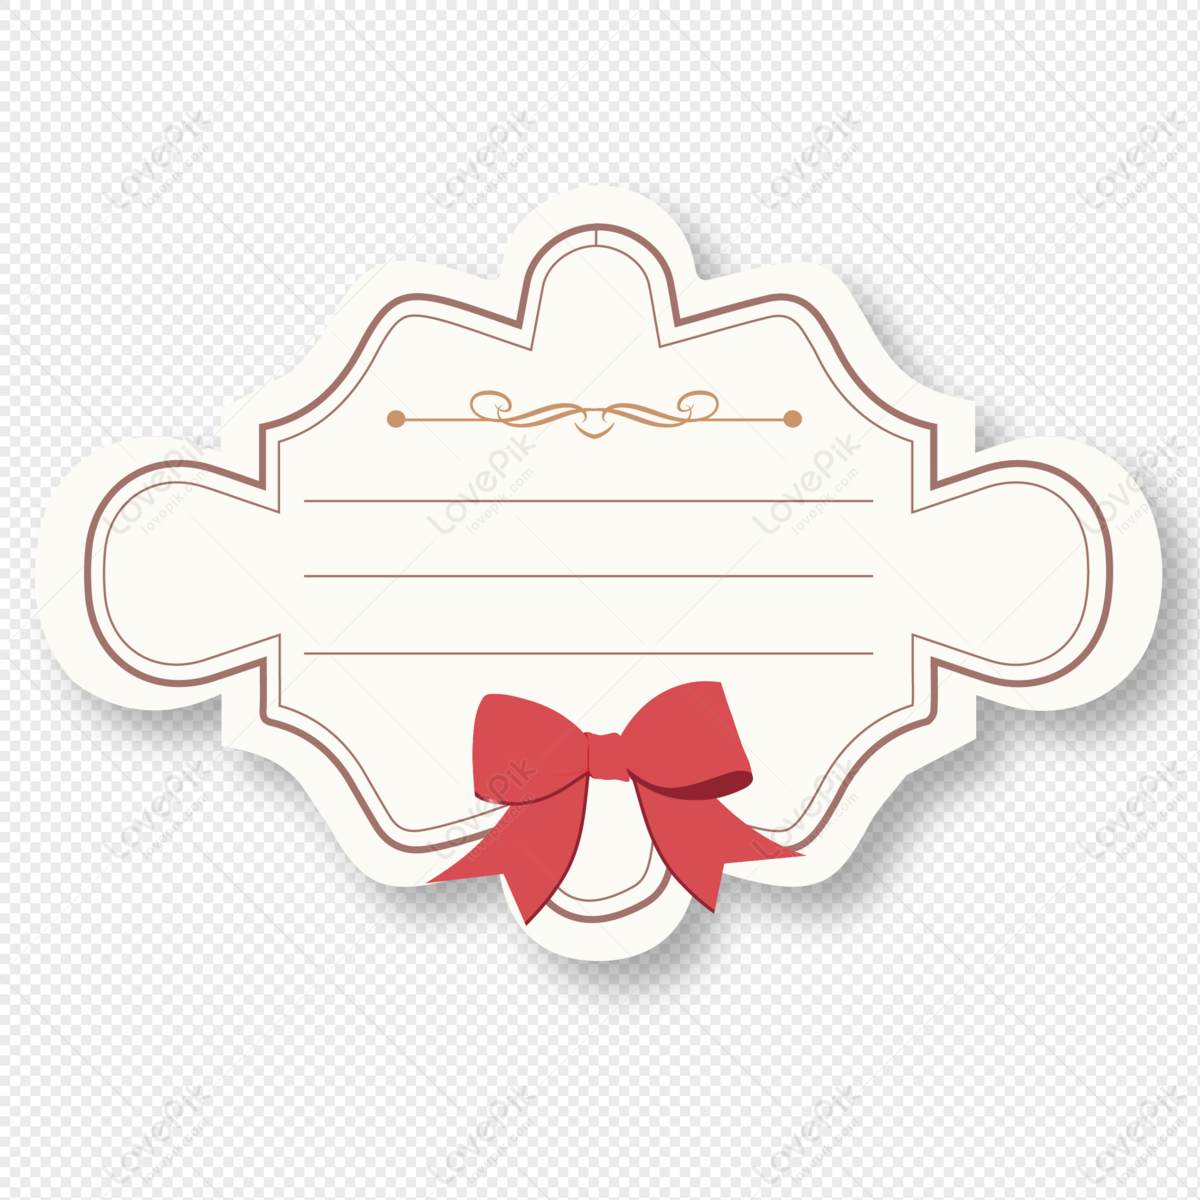 clipart free graphic wedding